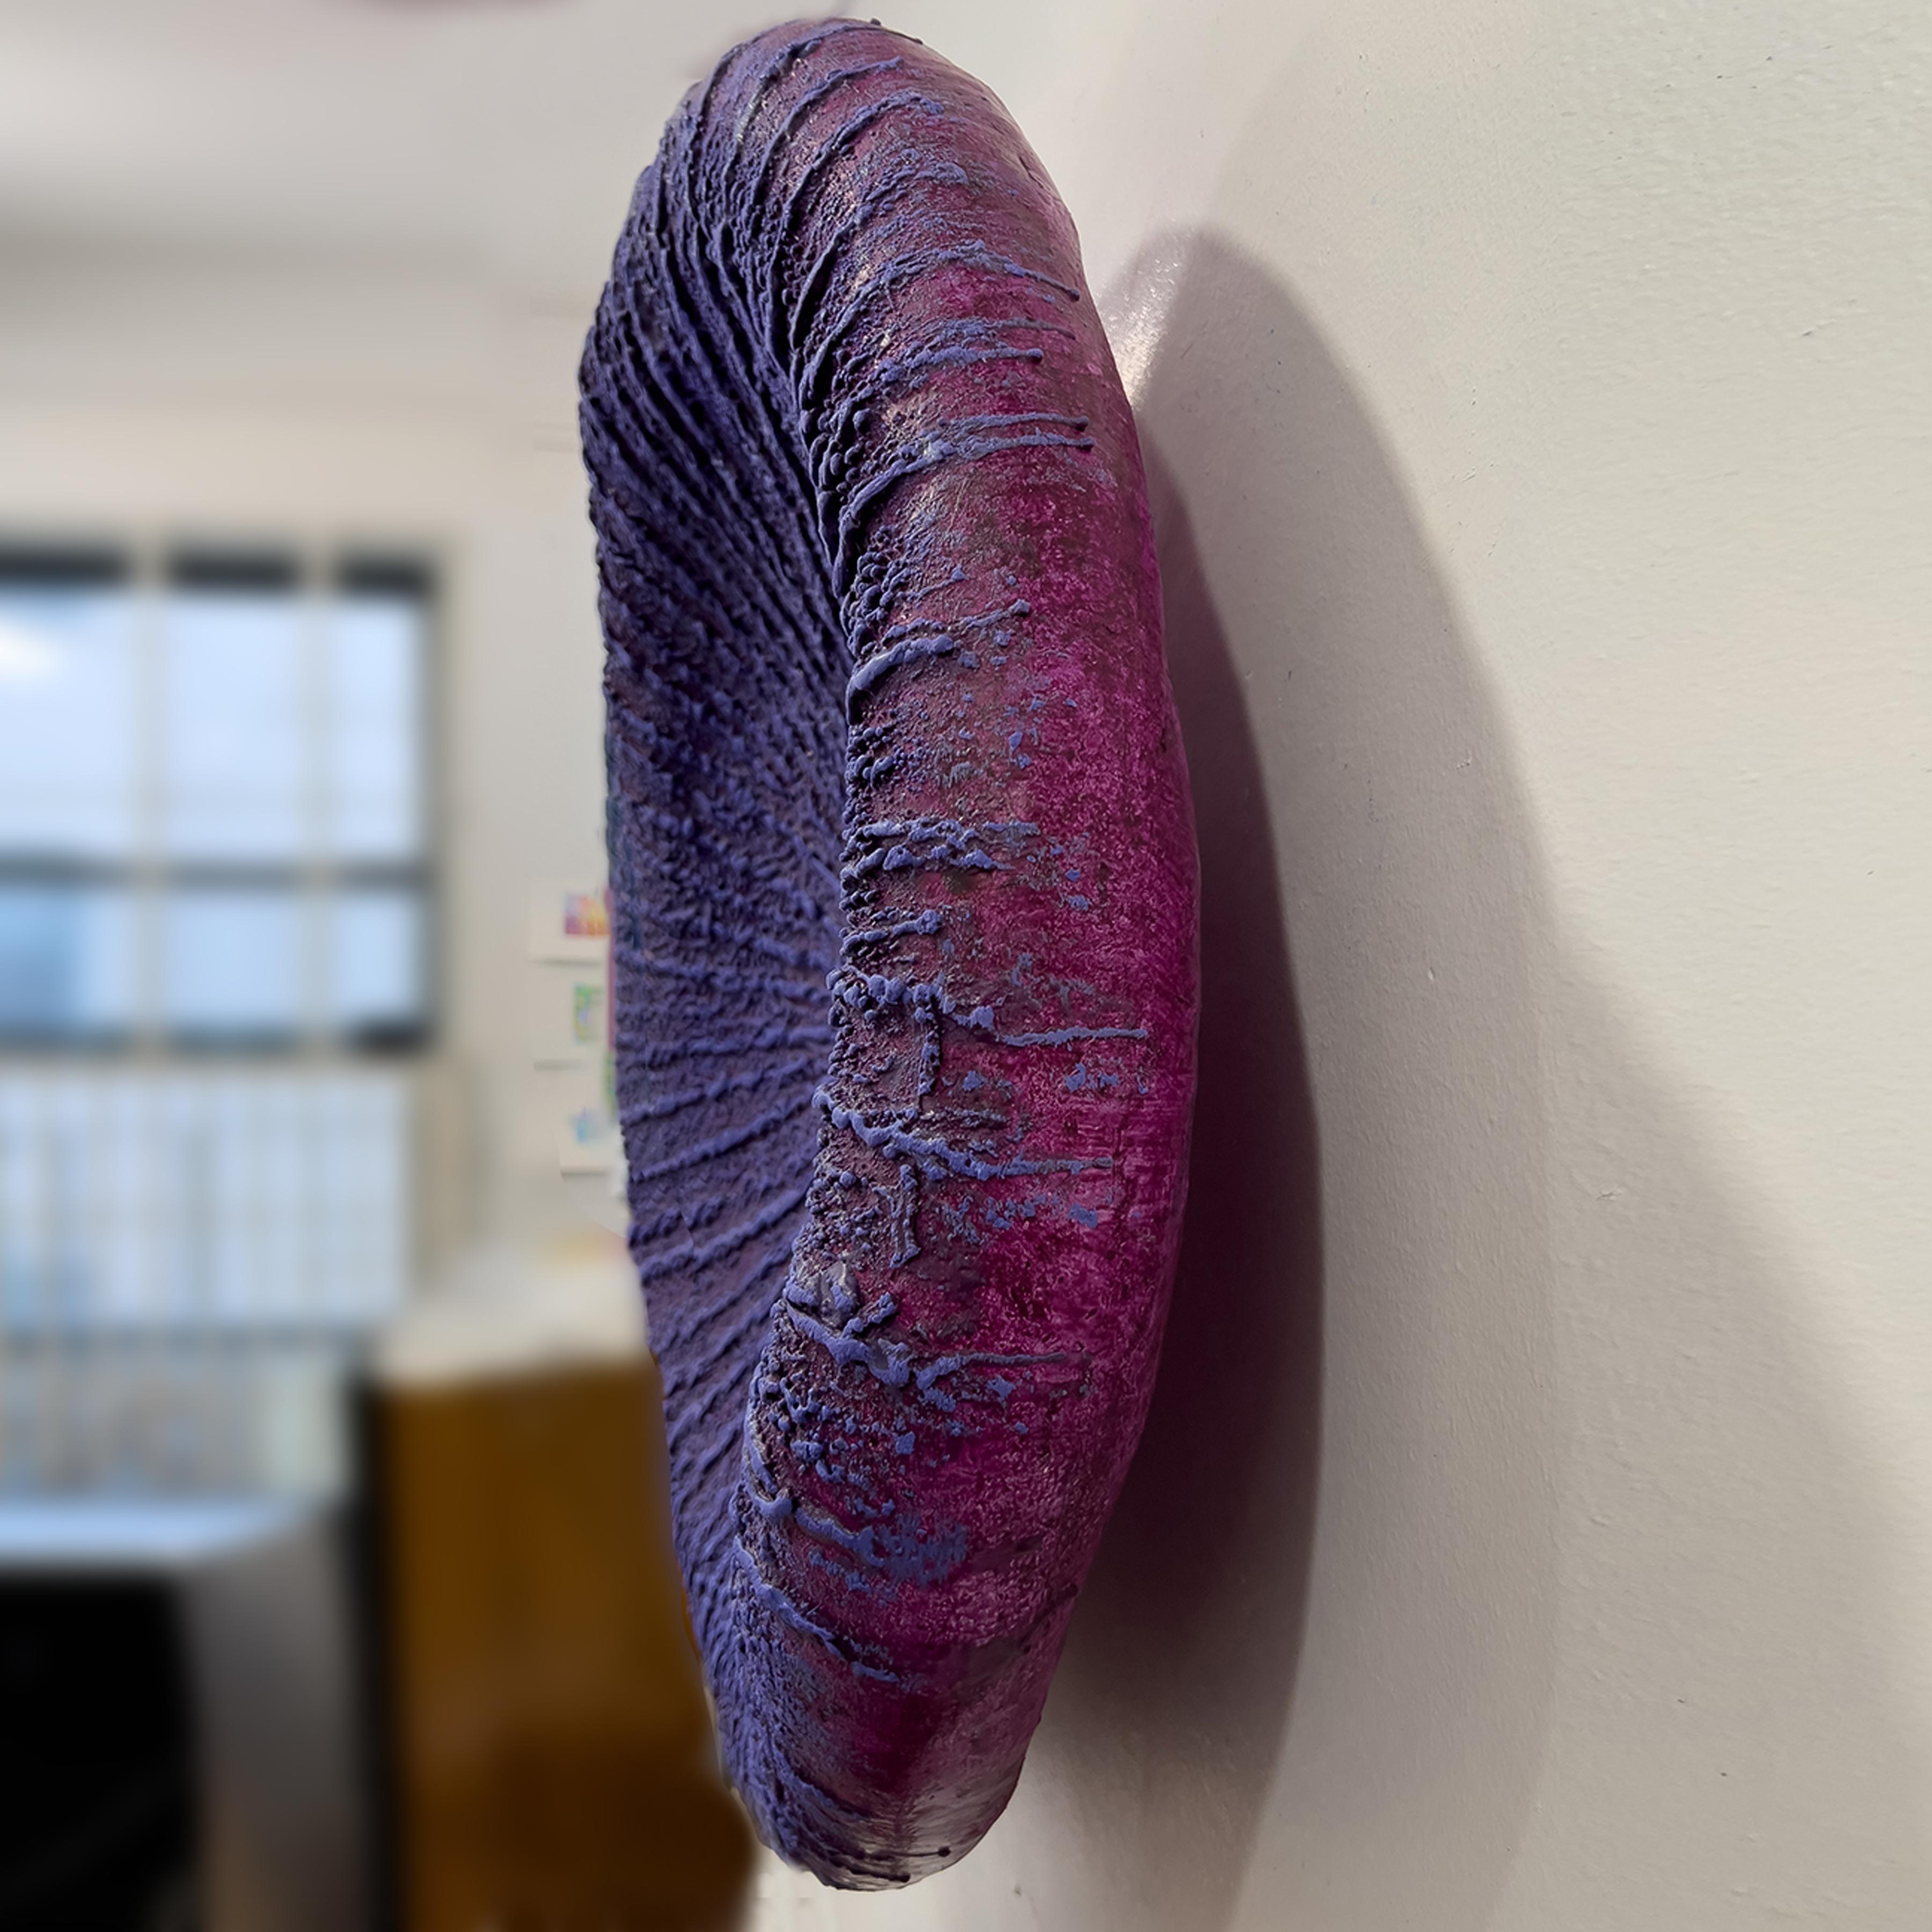 This minimalist purple 3D wall piece is by Barry Katz. He creates pieces that allude to the artist looking into a mirror. And in particular, one which reflects inner states. Not a mirror that flatters, far from, but one that tells inescapable